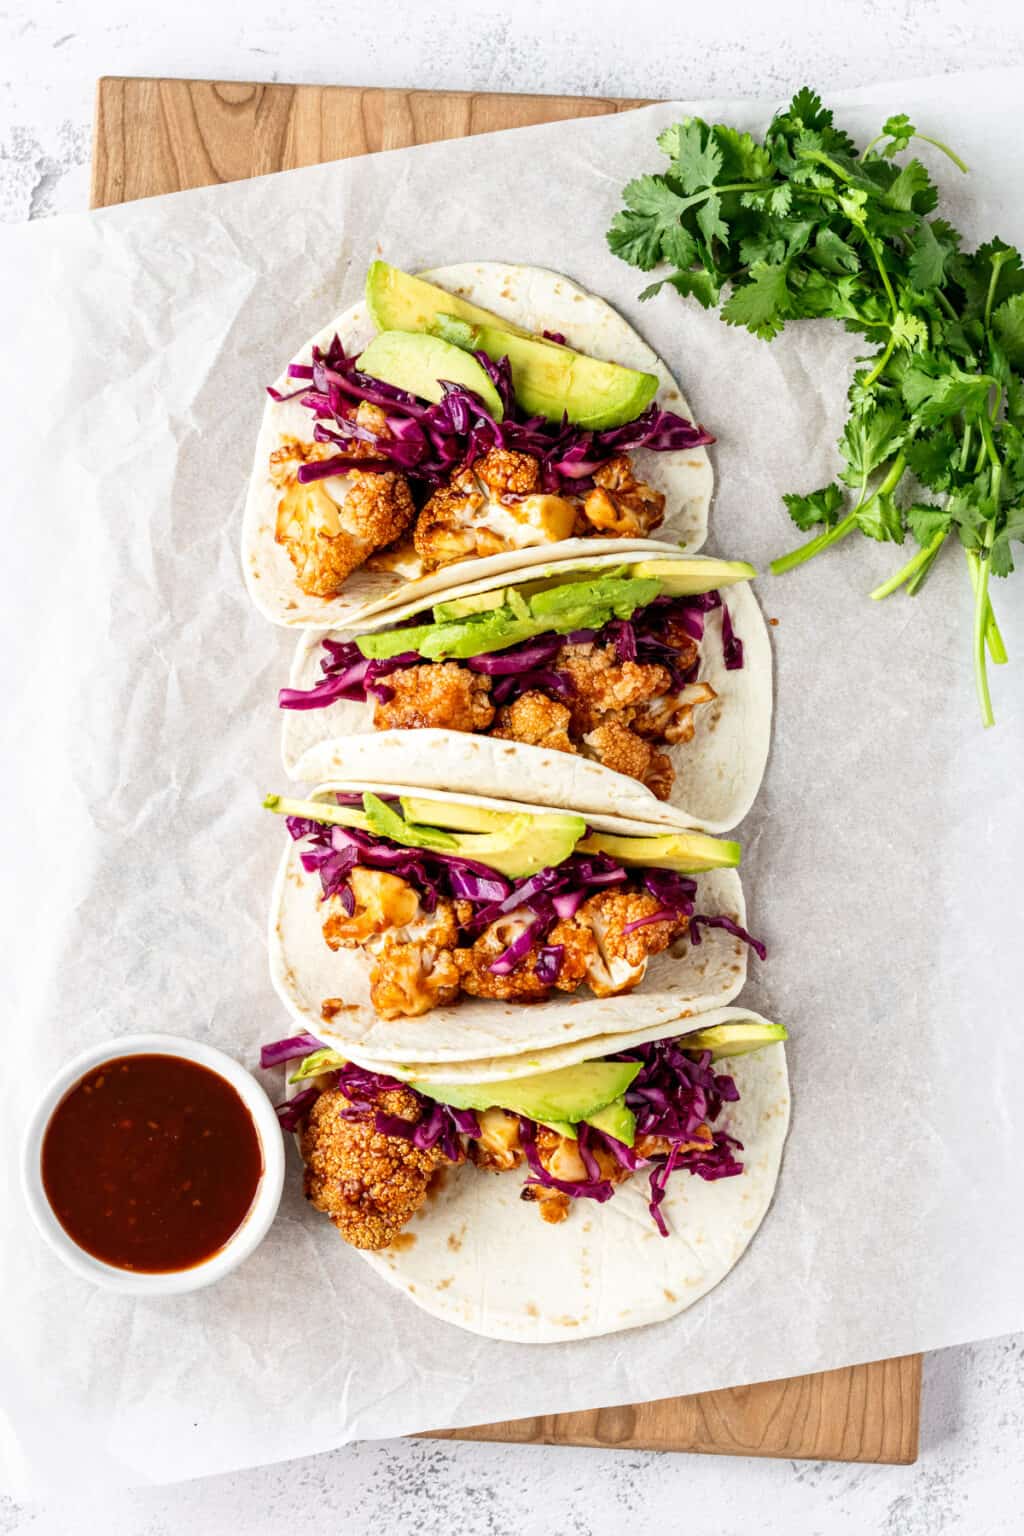 EASY ROASTED BBQ CAULIFLOWER TACOS (VEGAN) by Toshi's Table